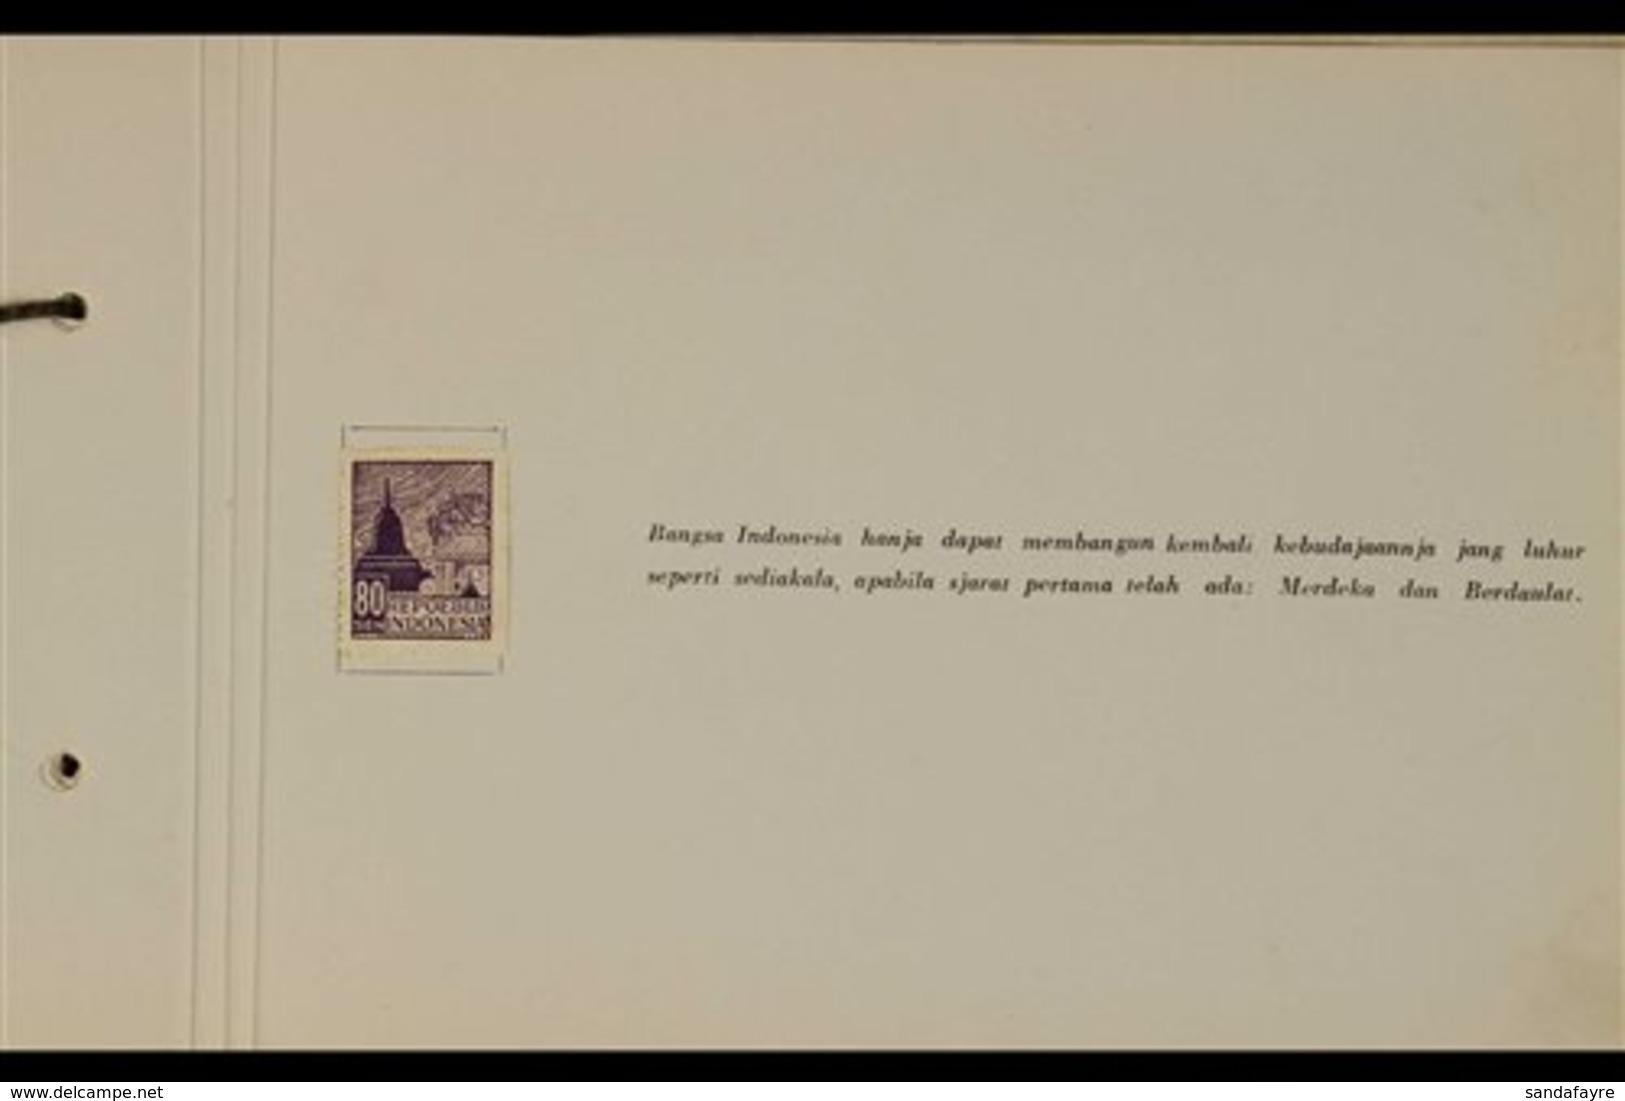 1945-1947  All Different Unused Stamps And Postal Stationery Cards In A Special Presentation Album Handstamped "With The - Indonesien